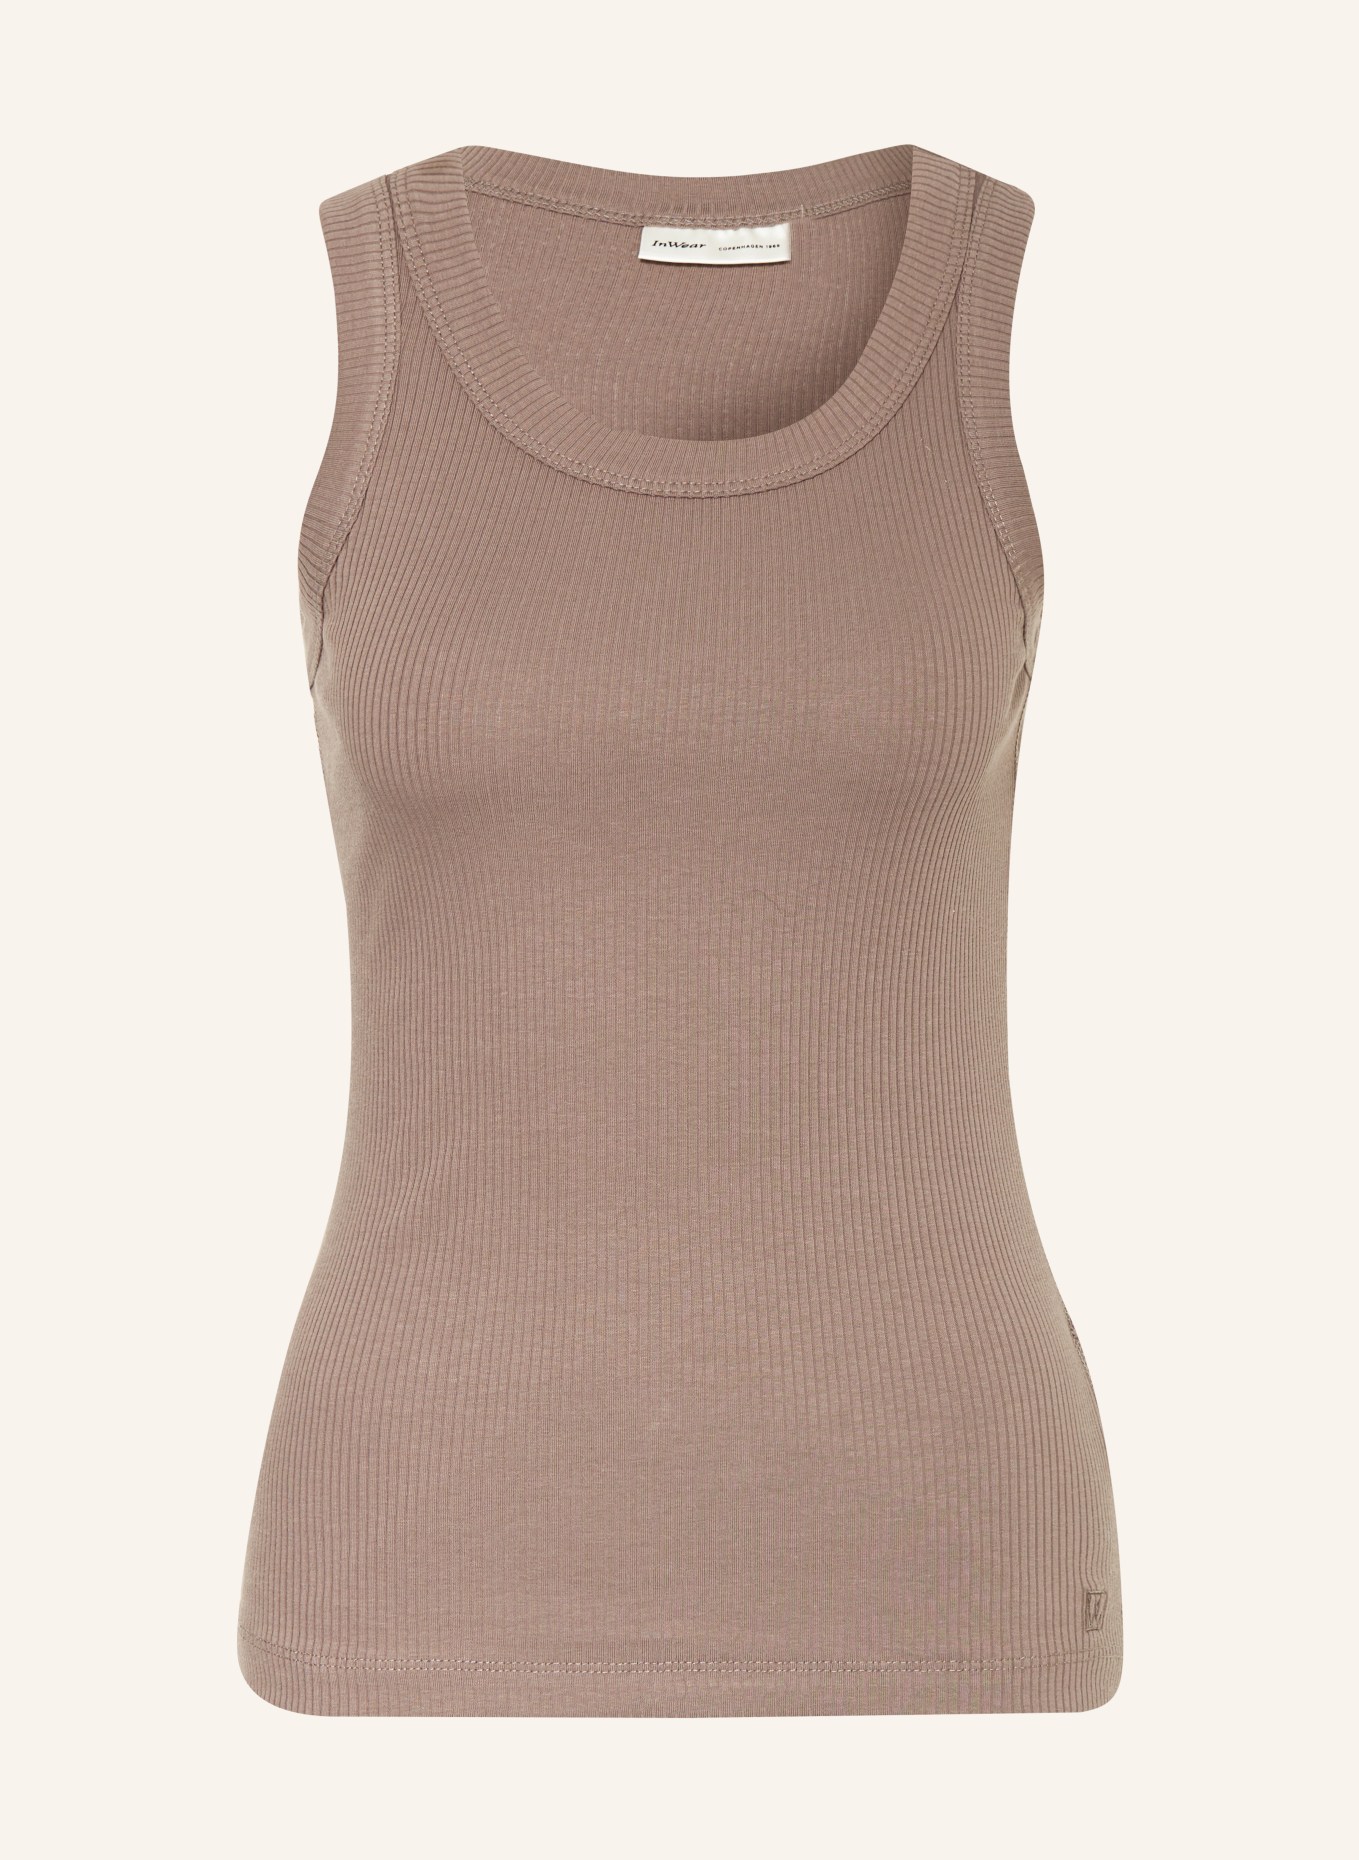 InWear Top DAGNALIW, Color: TAUPE (Image 1)